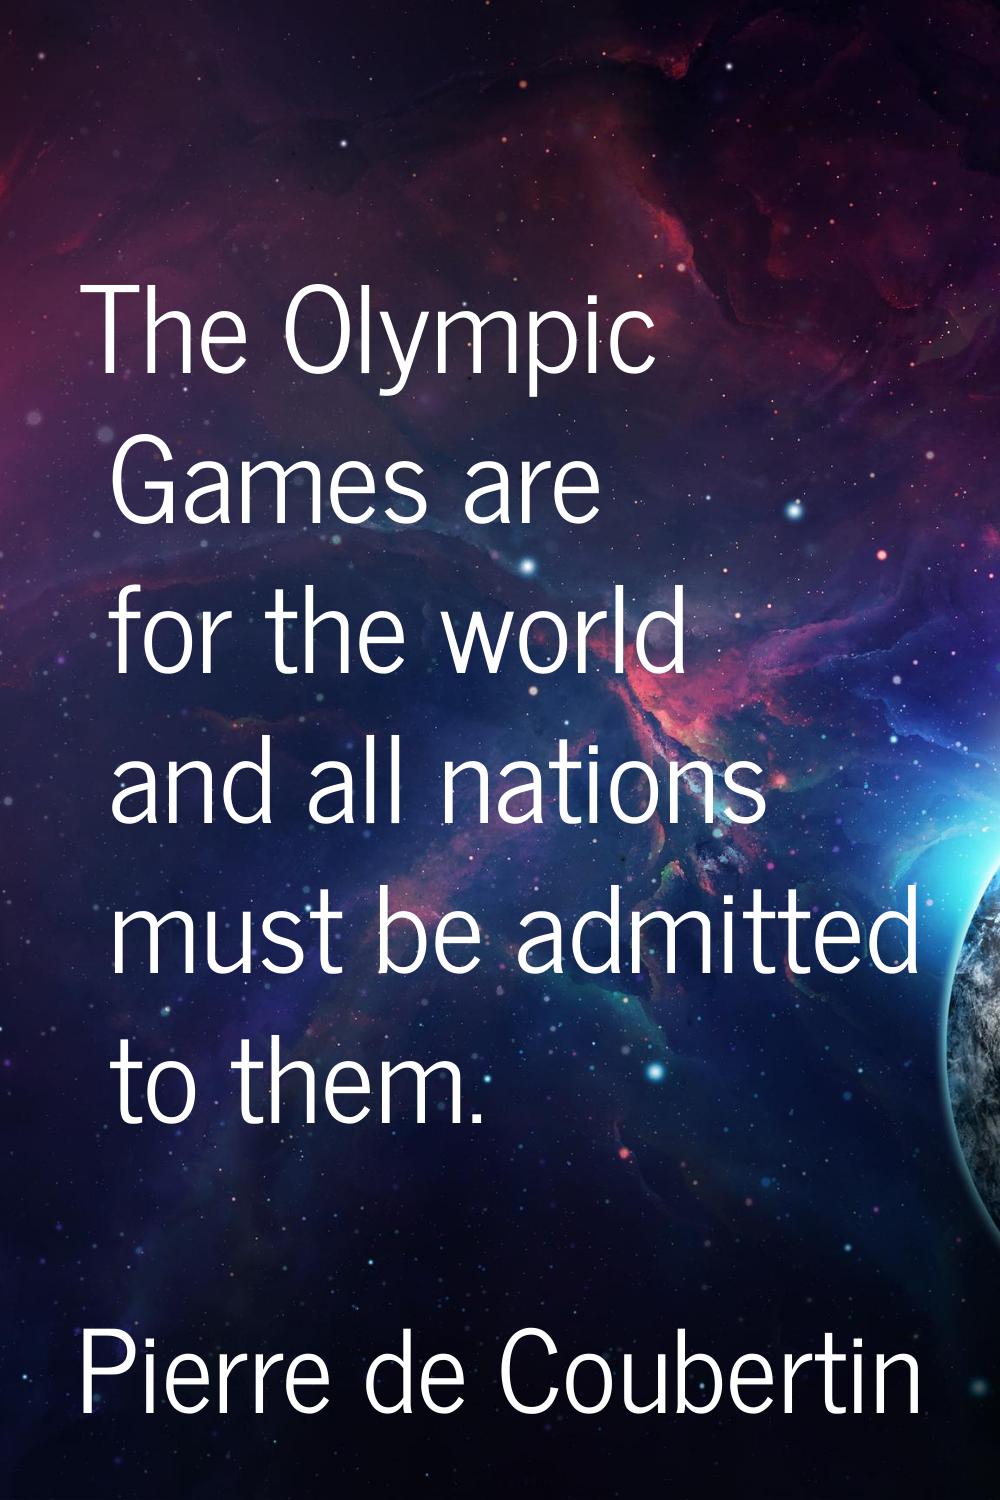 The Olympic Games are for the world and all nations must be admitted to them.